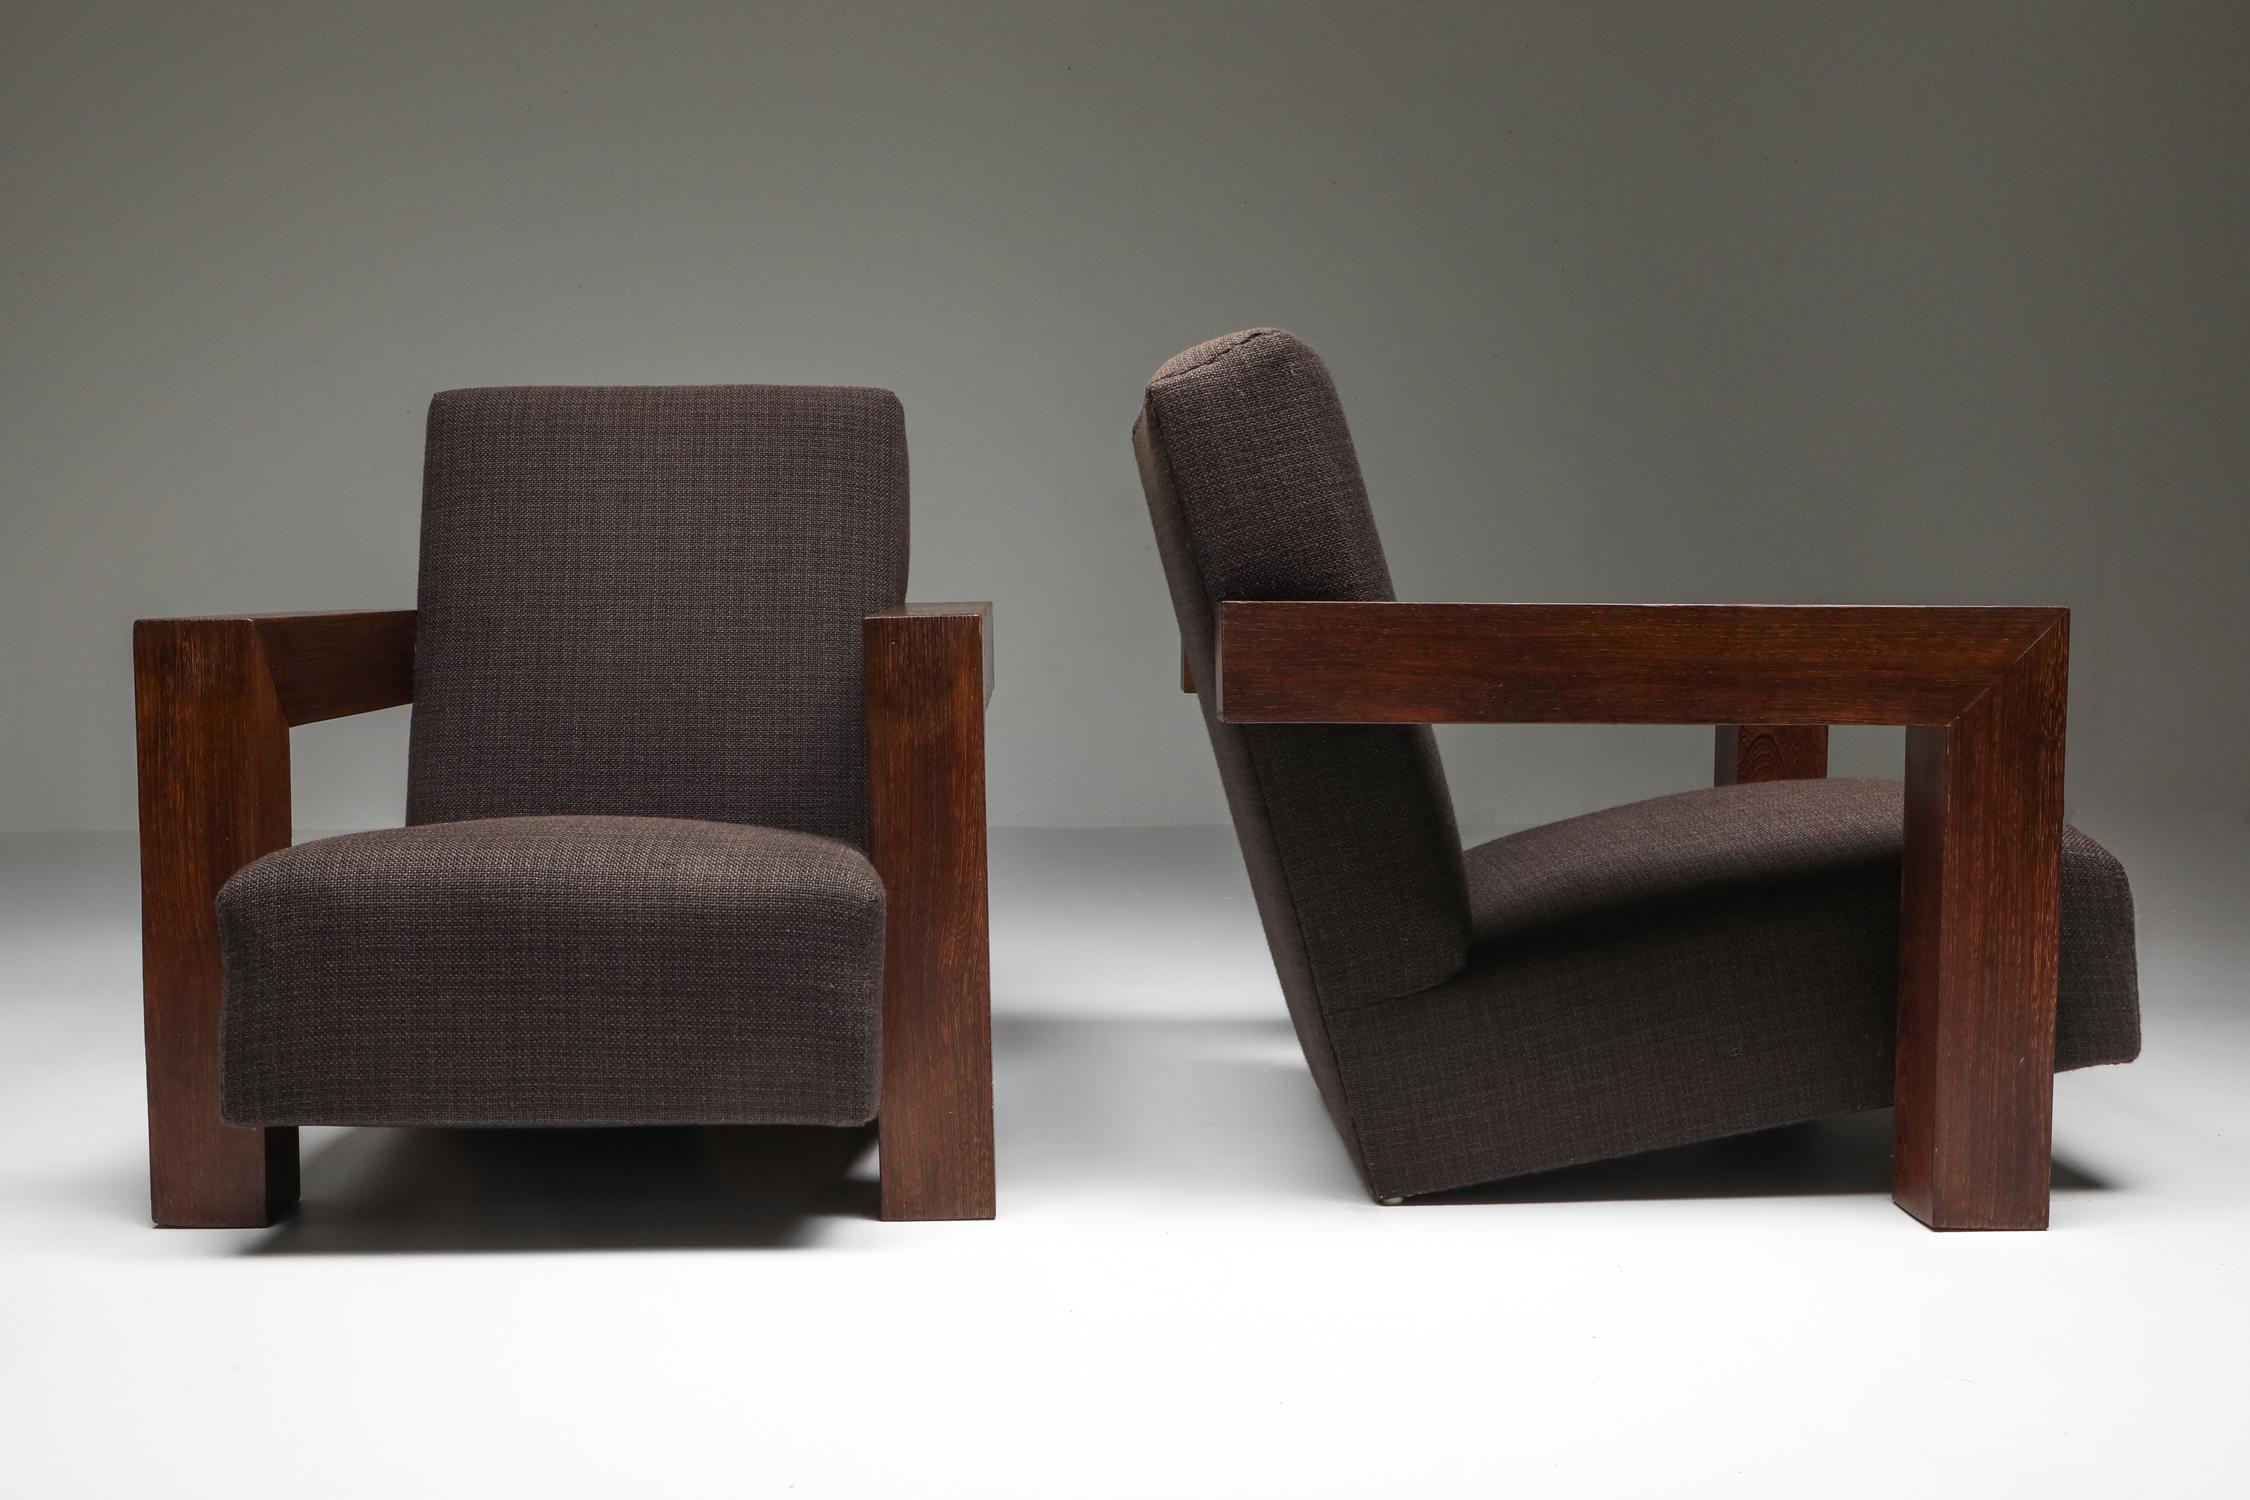 Utrecht chair, Gerrit Rietveld, architect edition 1960s, wenge frame, upholstery

Gerrit Rietveld came up with the design for the Utrecht armchair in 1935 while working for the Metz & Co. department store in Amsterdam, where his brief was to make